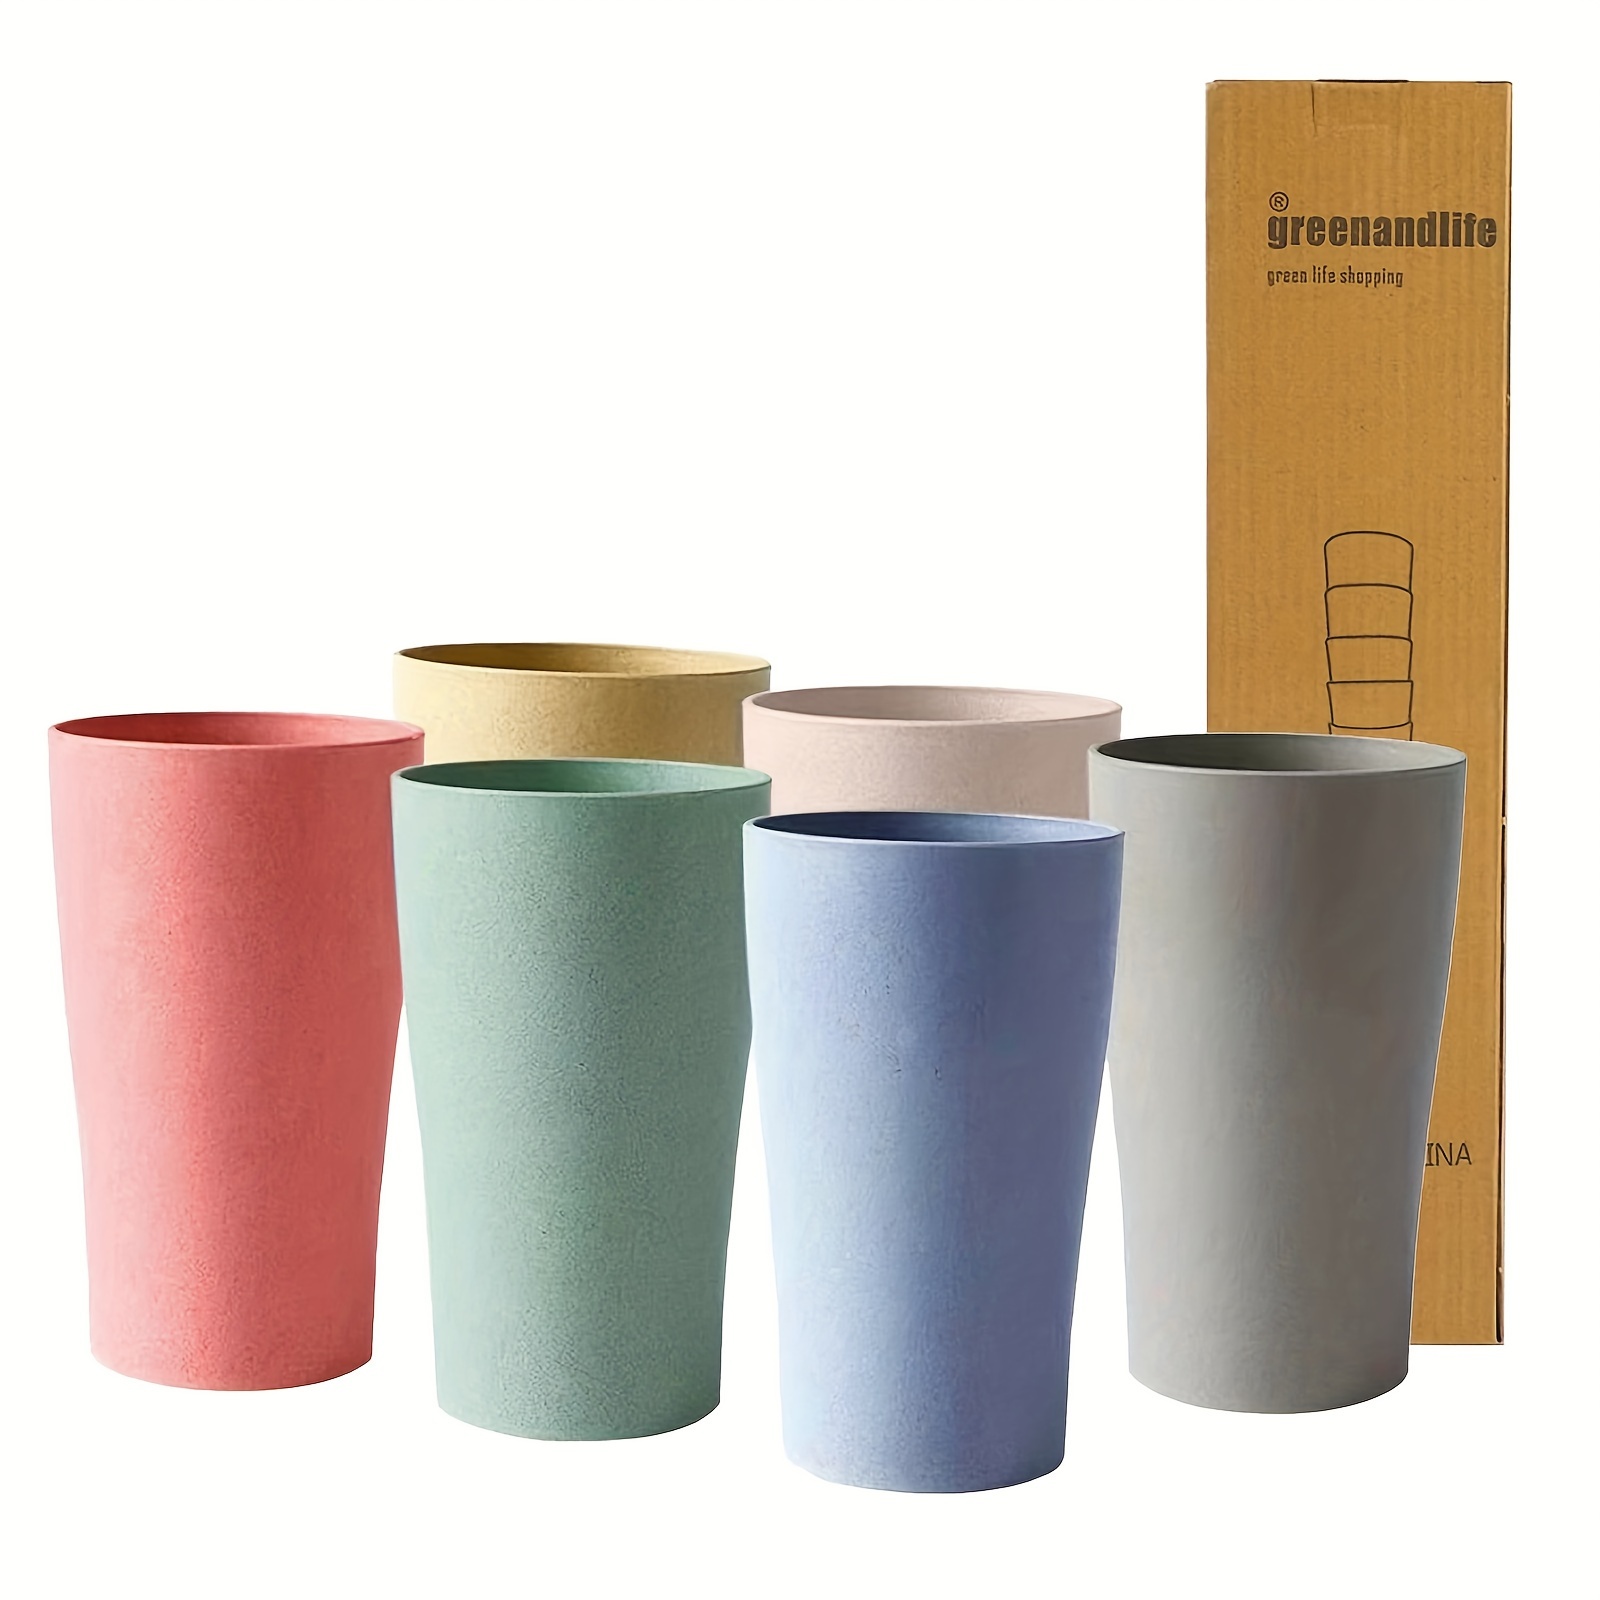 

6pcs, Multicolor Mugs For Coffee, Tea, Water, Milk, Juice, Wheat Straw Cup, Unbreakable, Non-toxic, Bpa Free And Healthy 400ml/14oz